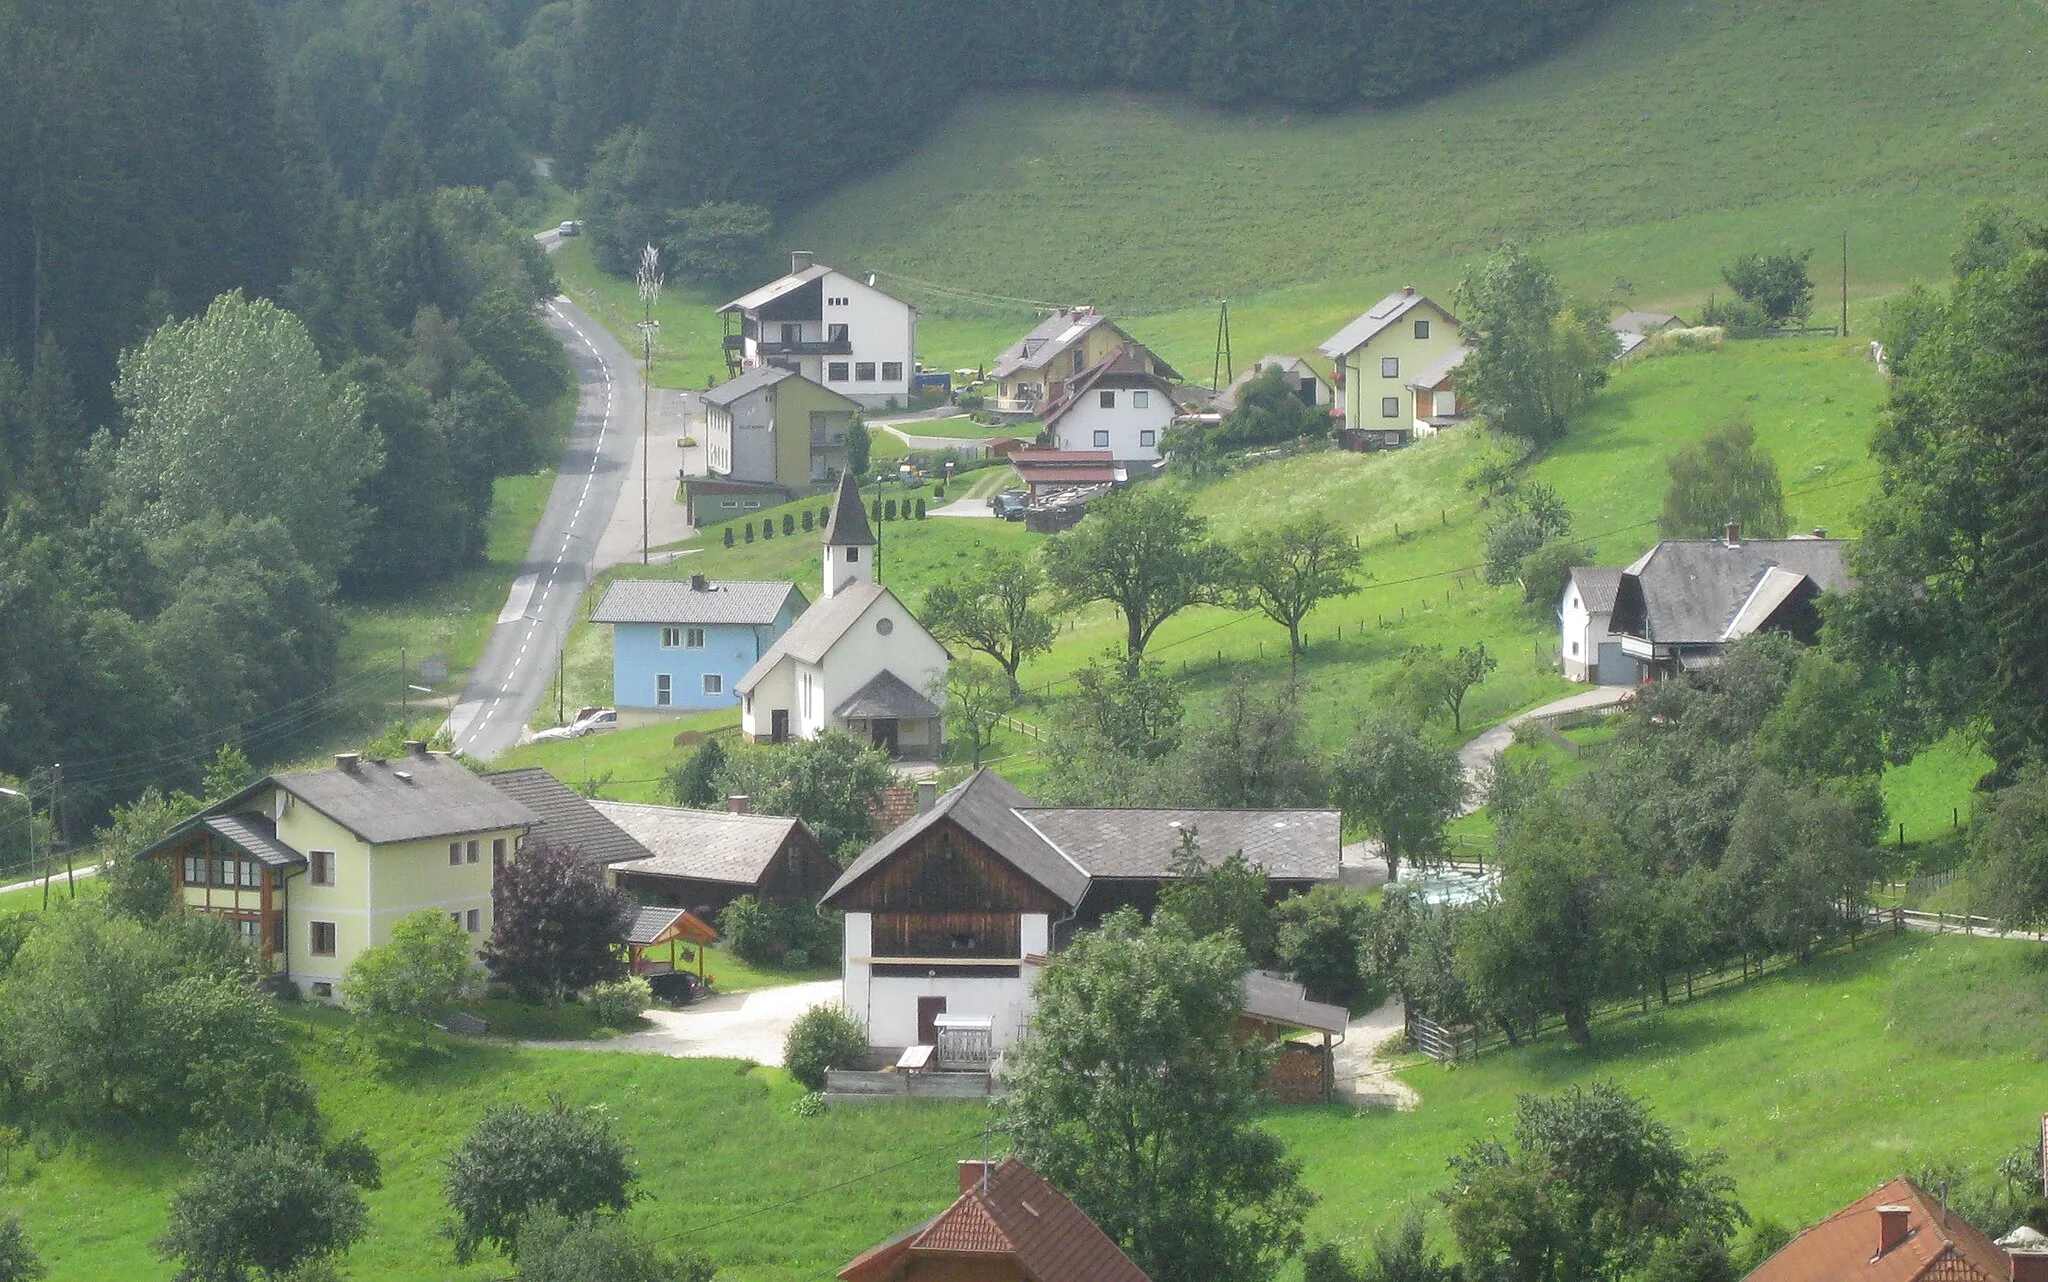 Photo showing: The Town "Kliening", near Bad St. Leonhard